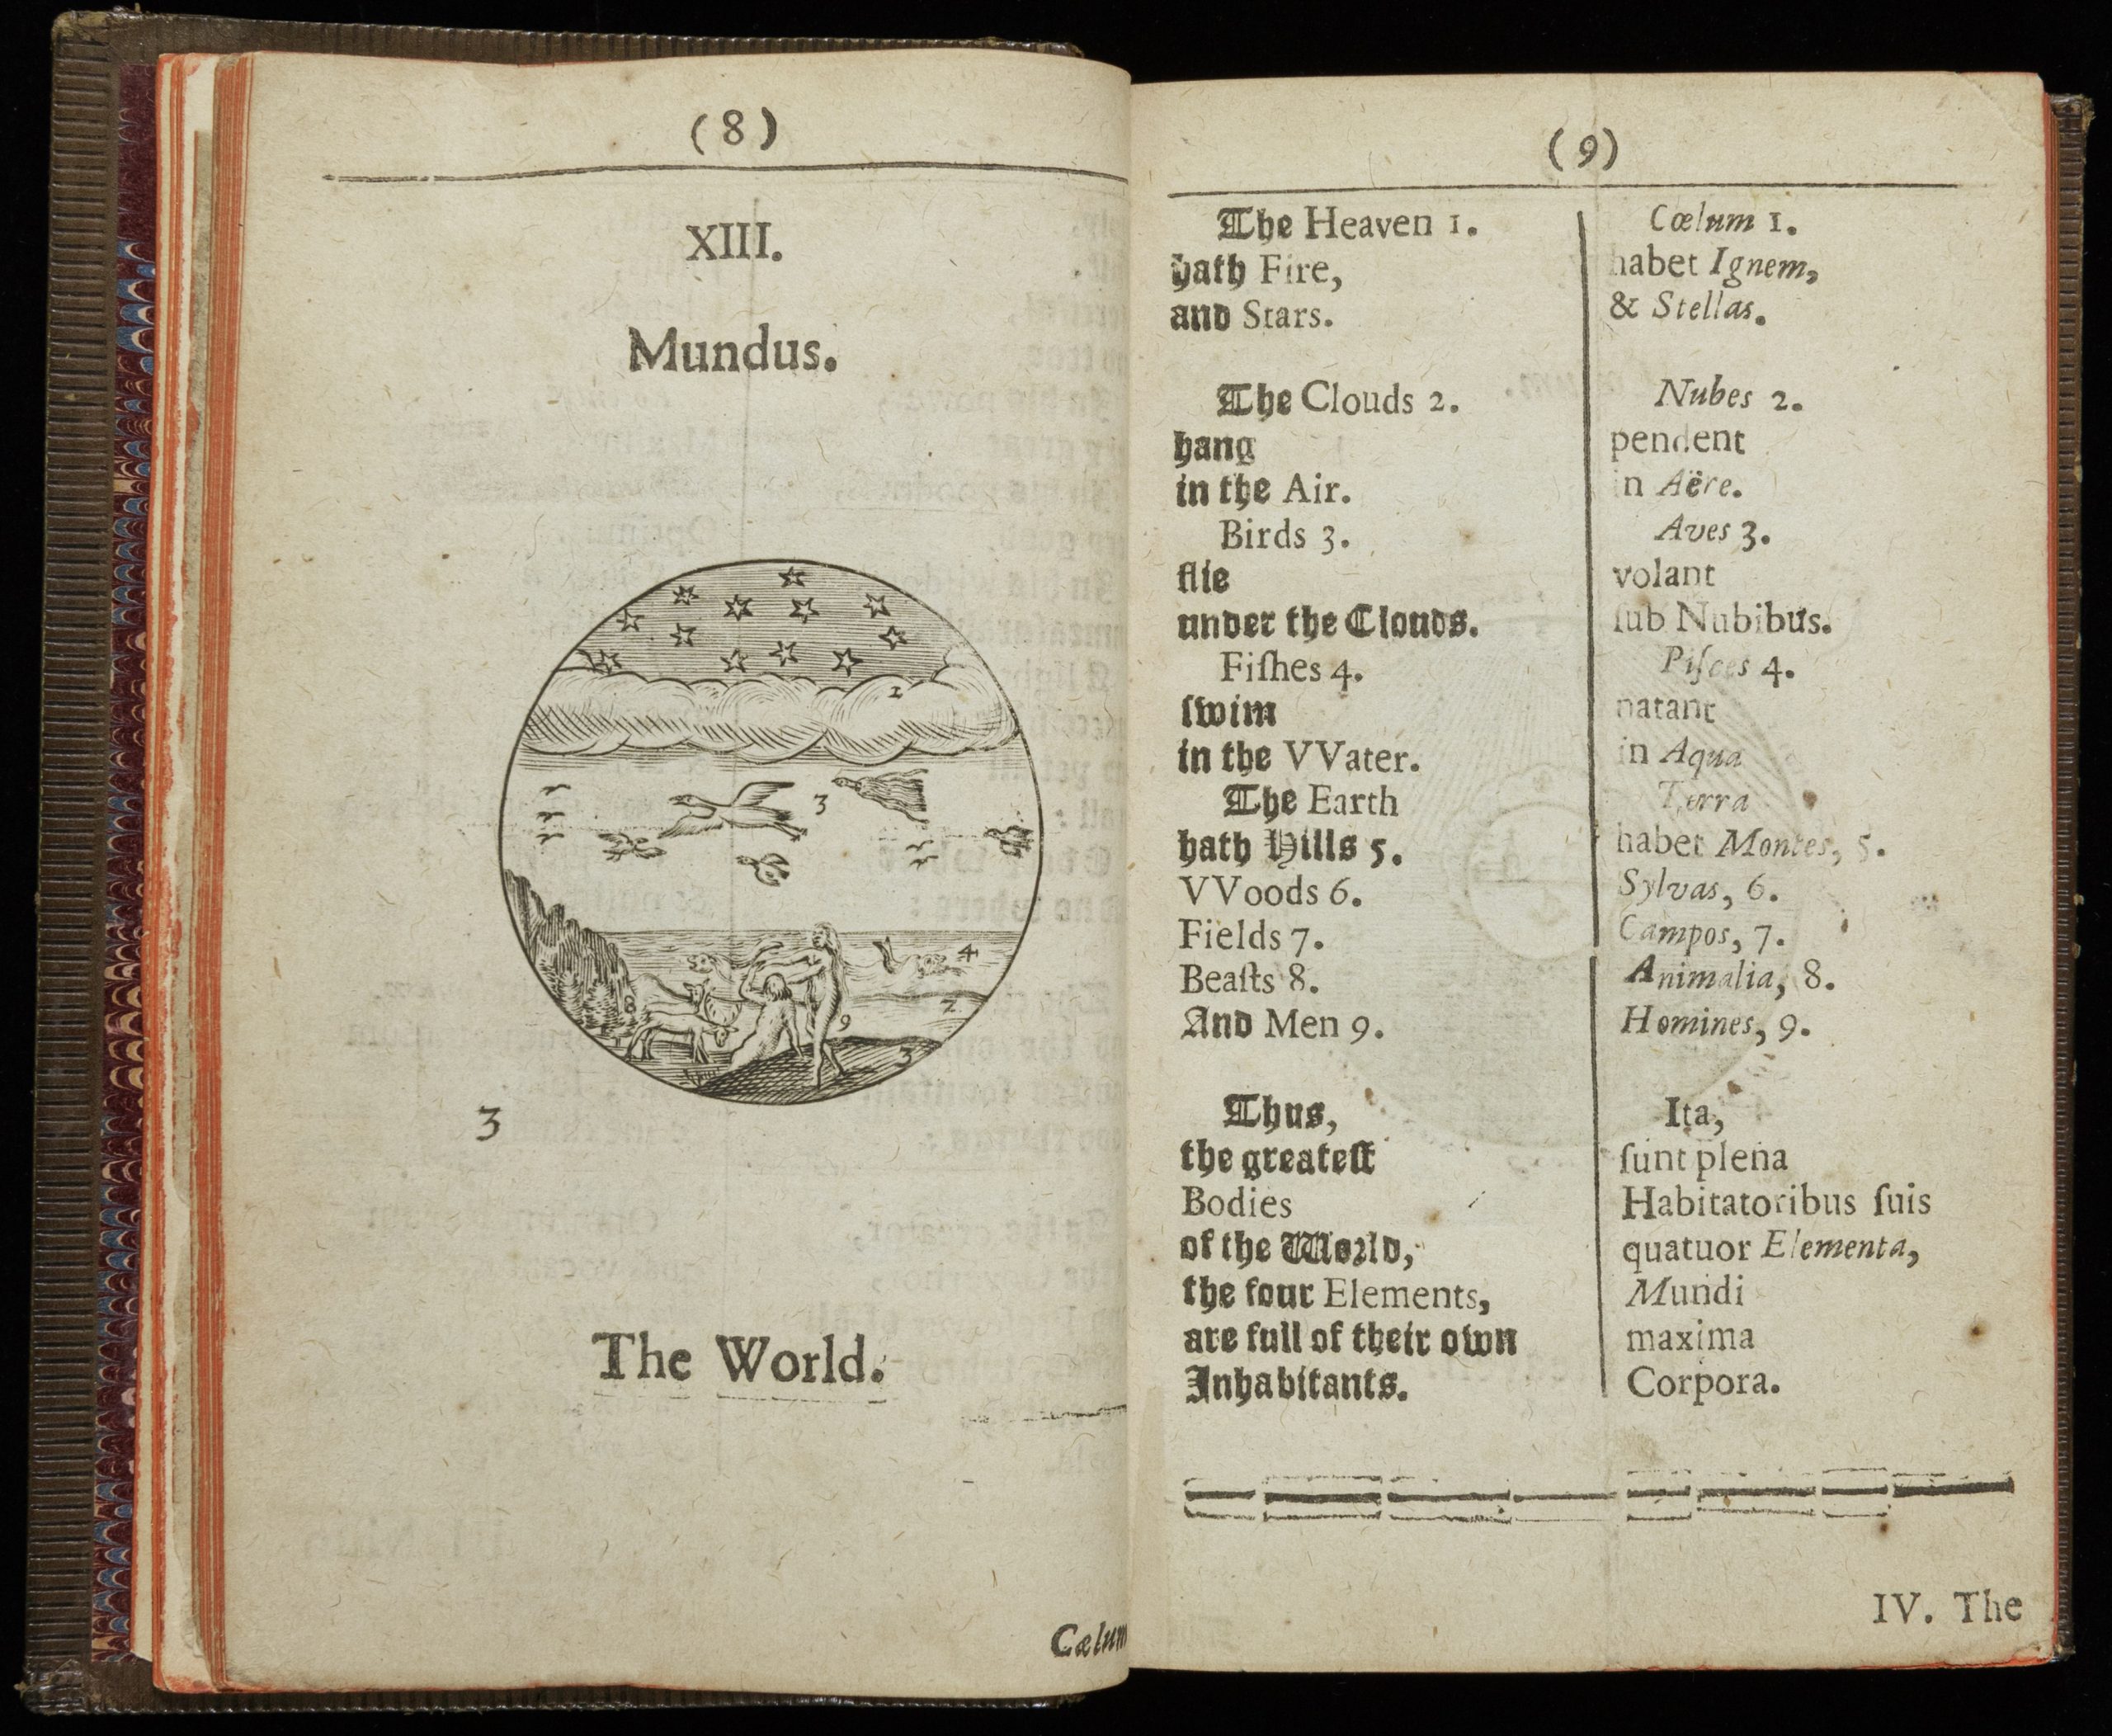 Two-page spread of an early printed book. Text is in English and Latin in black in an 17th-century font (some "s"s written as "f"s). On the left-hand page is a circular woodblock print image showing the land with people (numbered 9), animals (8), fields (7), hills (5), and trees (8); the sea with fish (4) in it, the sky with birds (3) and a band of clouds (2); above the clouds is darker sky with stars (1). Abov the image is the title "Mundus" and below it the title "The World." On the right-hand page is text in English and Latin. In English, the text reads, "The Heaven 1./hath Fire,/and Stars./The Clouds 2./hang/in hte Air./Birds 3./flie/under the Clouds./Fifhes 4./swim/in the Water./The Earth/hath Hills 5./Woods 6./Fields 7./Beafts 8./And Men 9./Thus/the greateft/Bodies/of the World/the four Elements,/are full of their own Inhabitants."